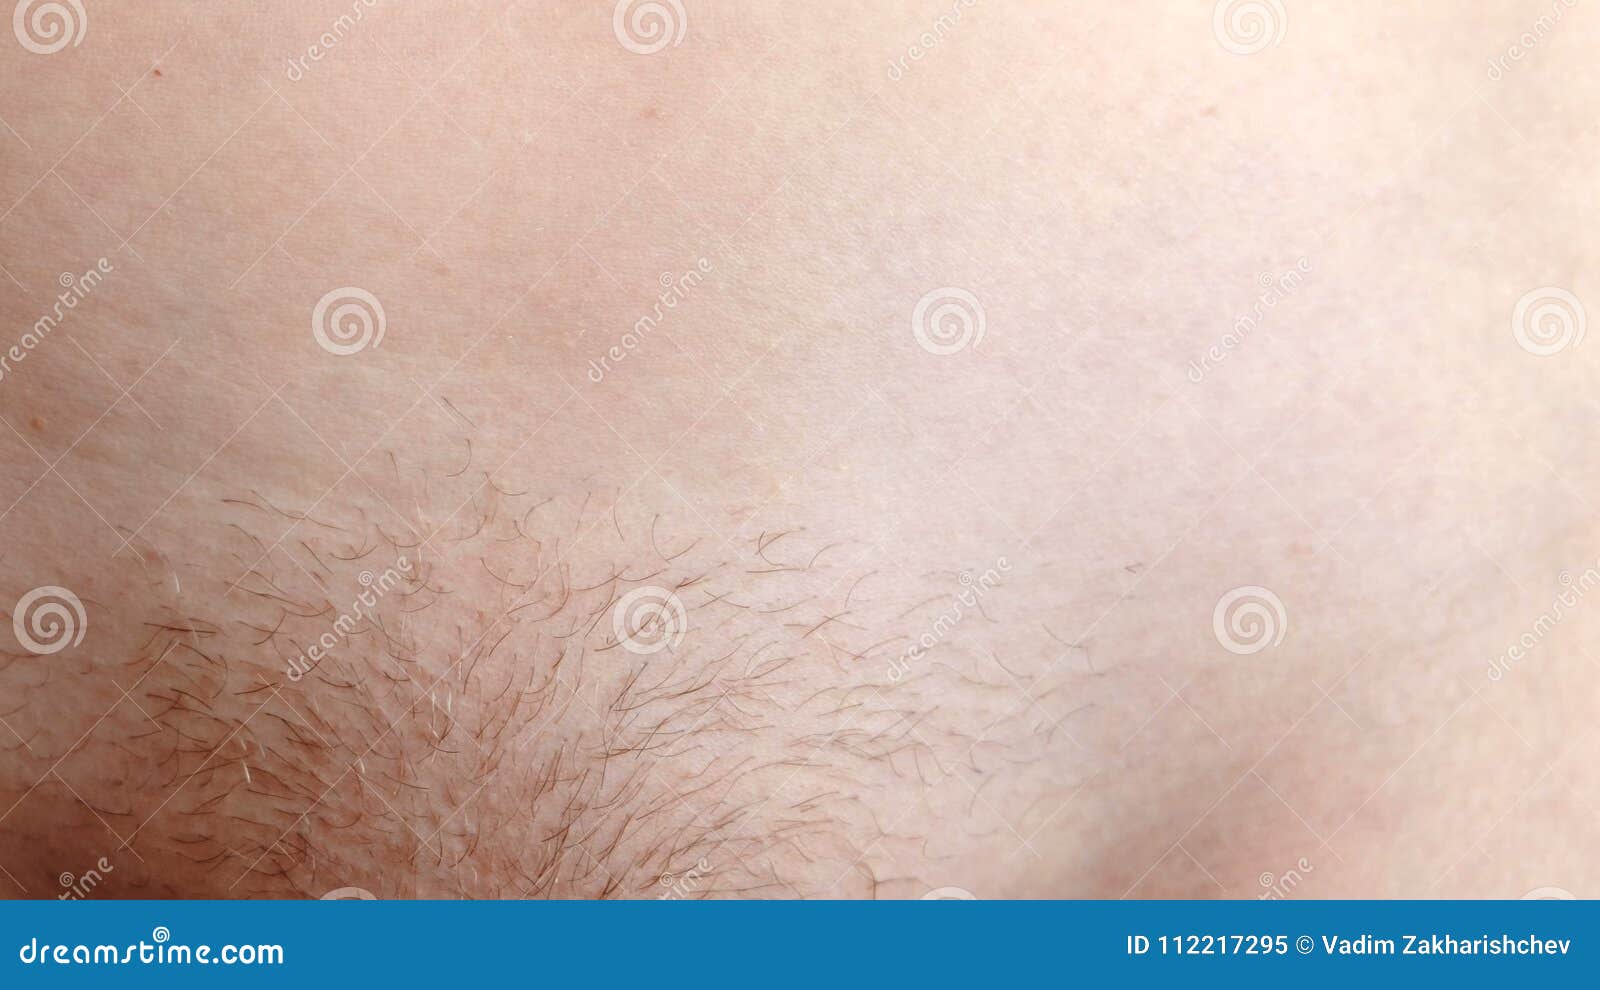 Vagina or not shave How deep